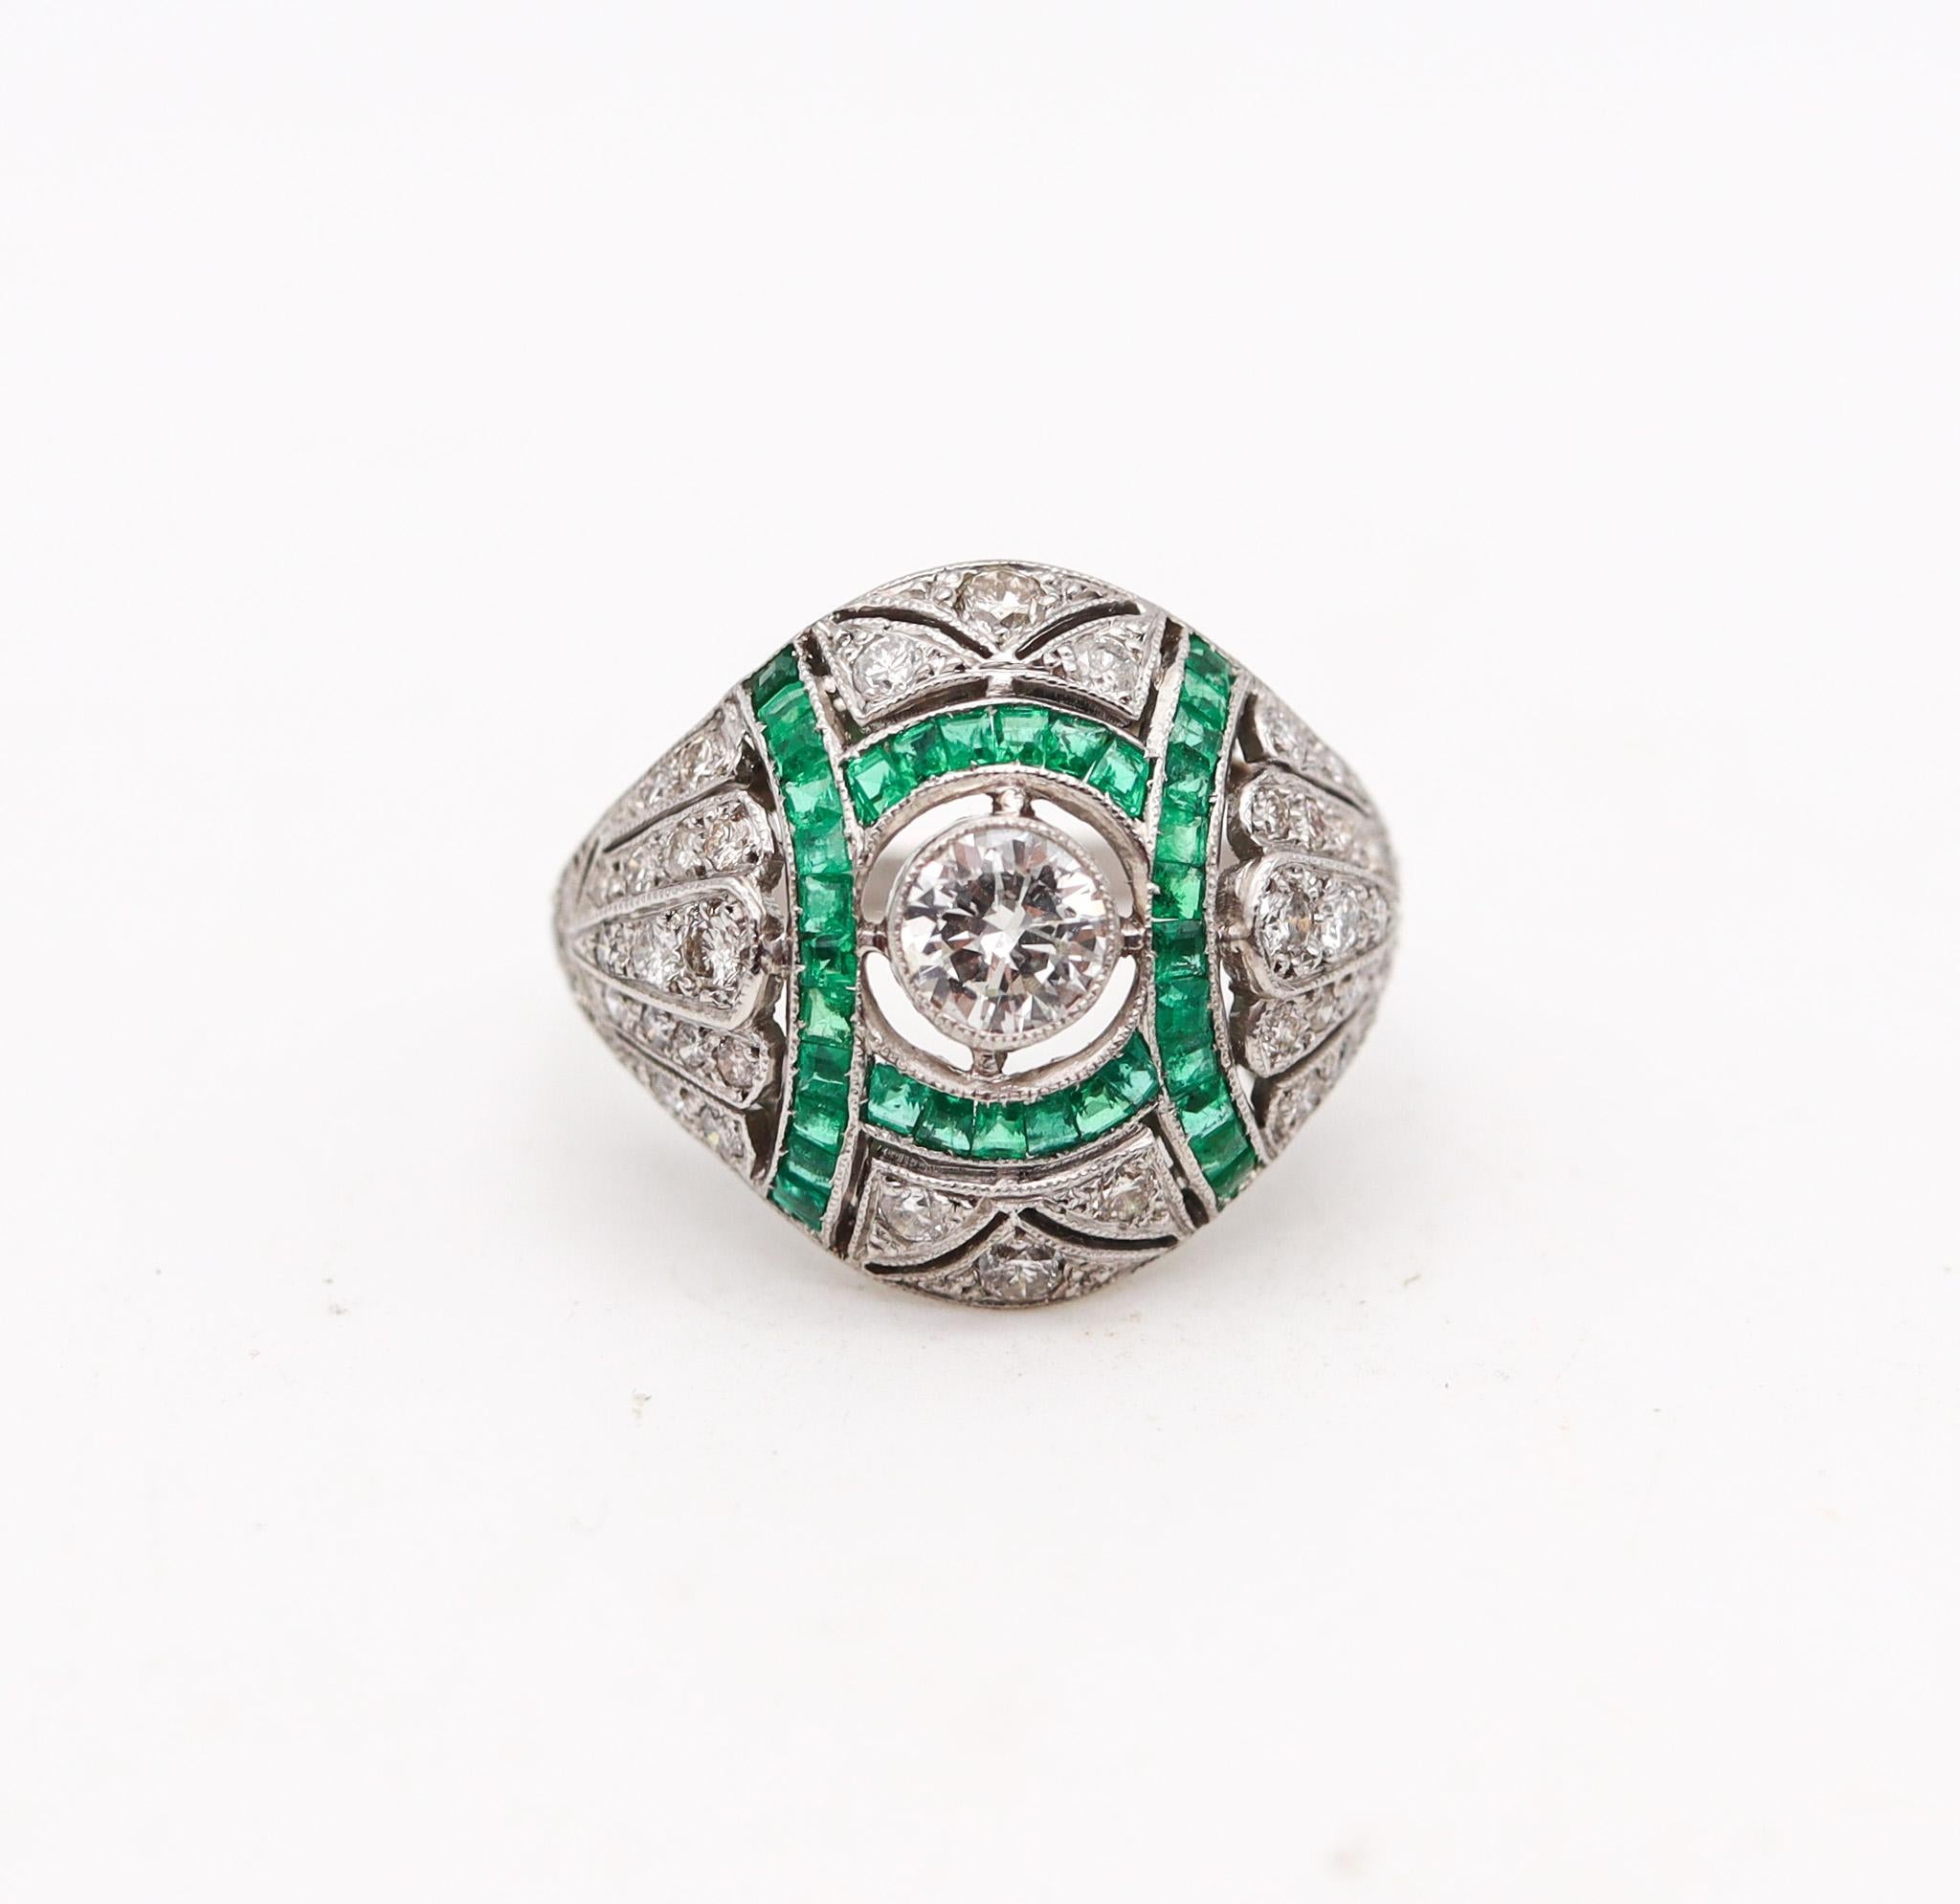 Mixed Cut Art Deco 1930 Cocktail Bombe Ring In Platinum With 3.19 Ctw Diamonds And Emerald For Sale